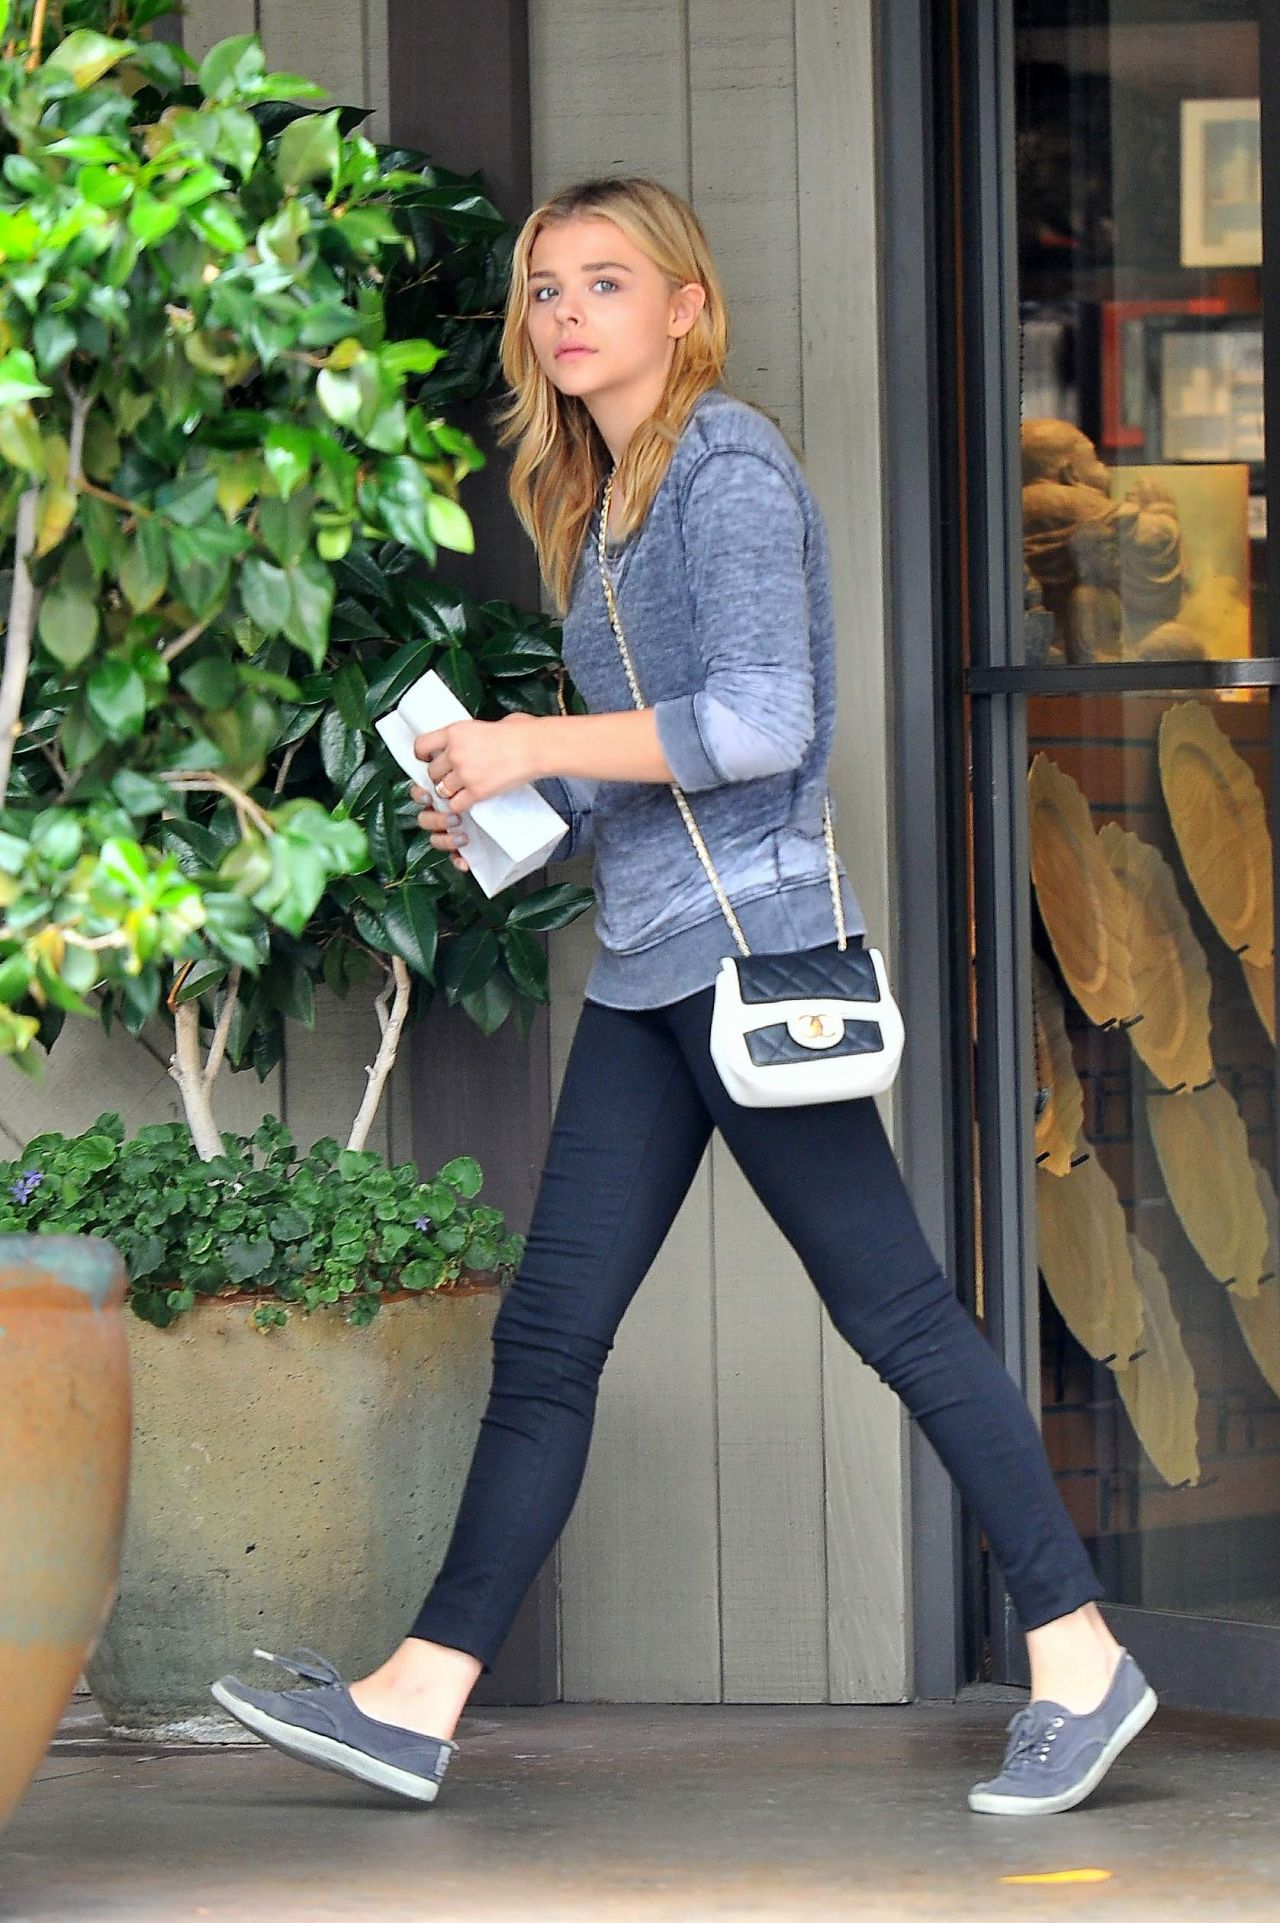 Chloe Moretz Casual Style - Out in Beverly Hills 6/15/2016 